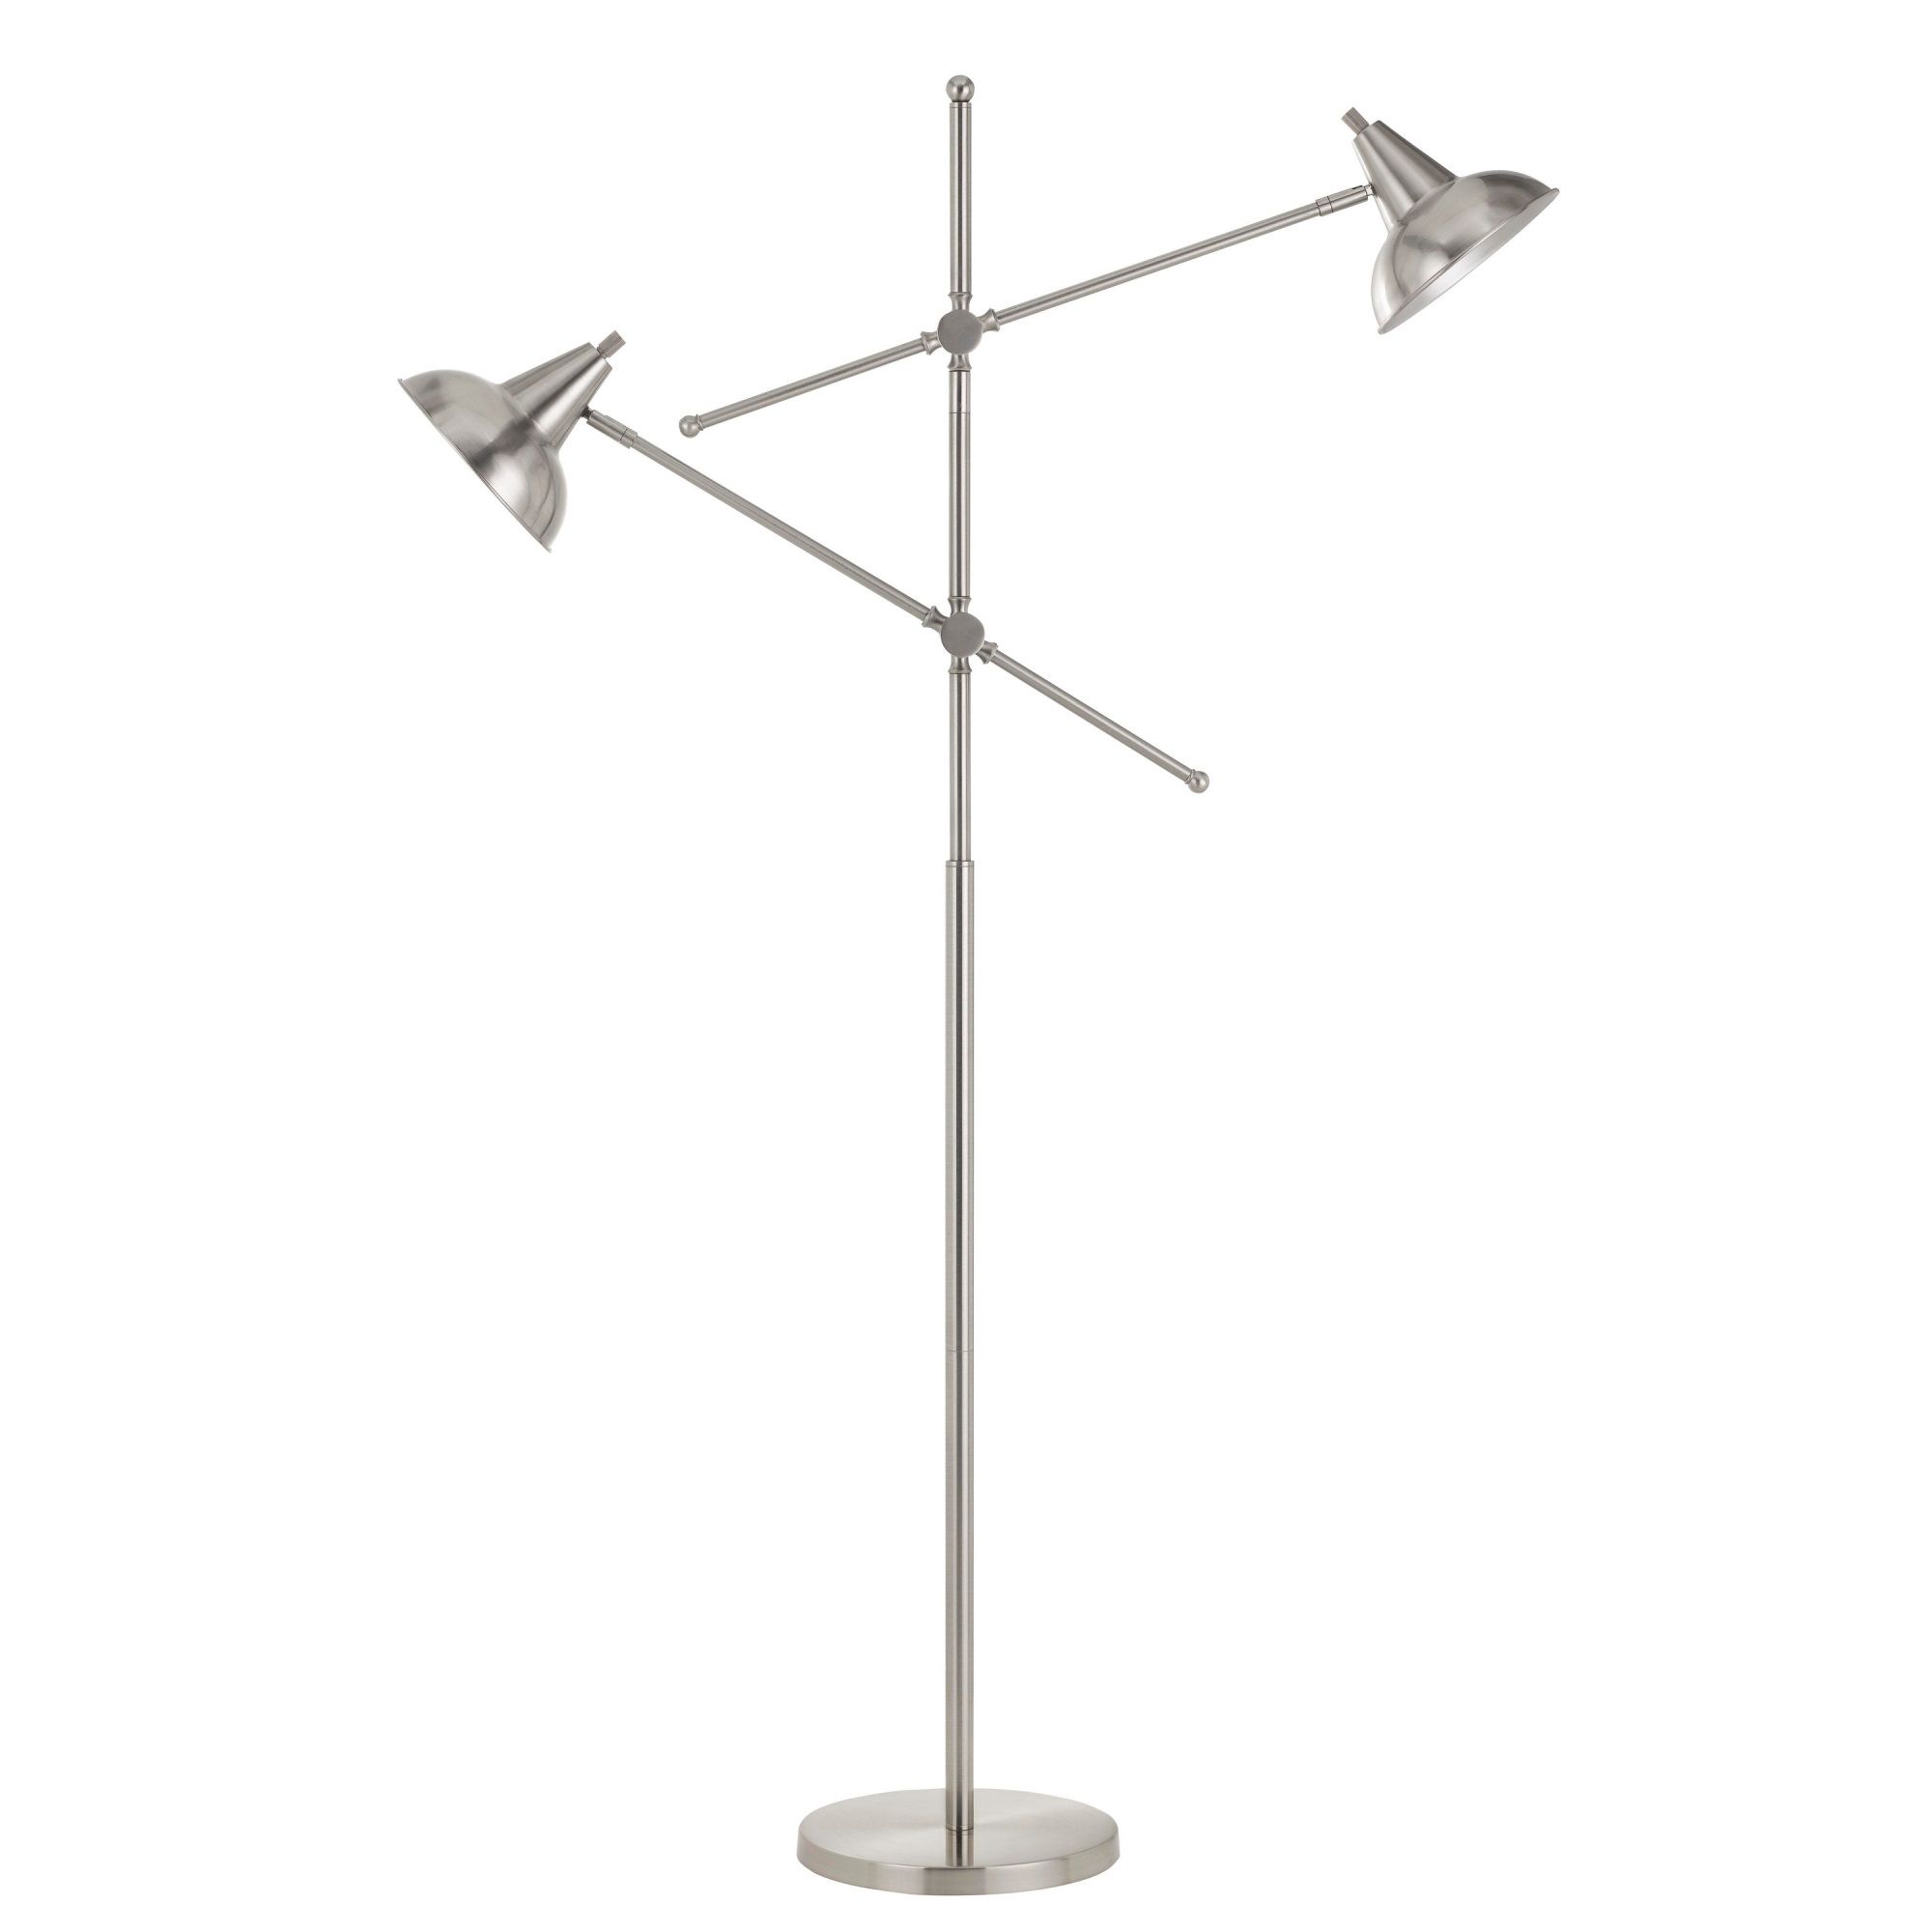 Tubular Metal Body Floor Lamp With 2 Adjustable Arms, Silver – Walmart Inside 2 Arm Floor Lamps (View 15 of 15)